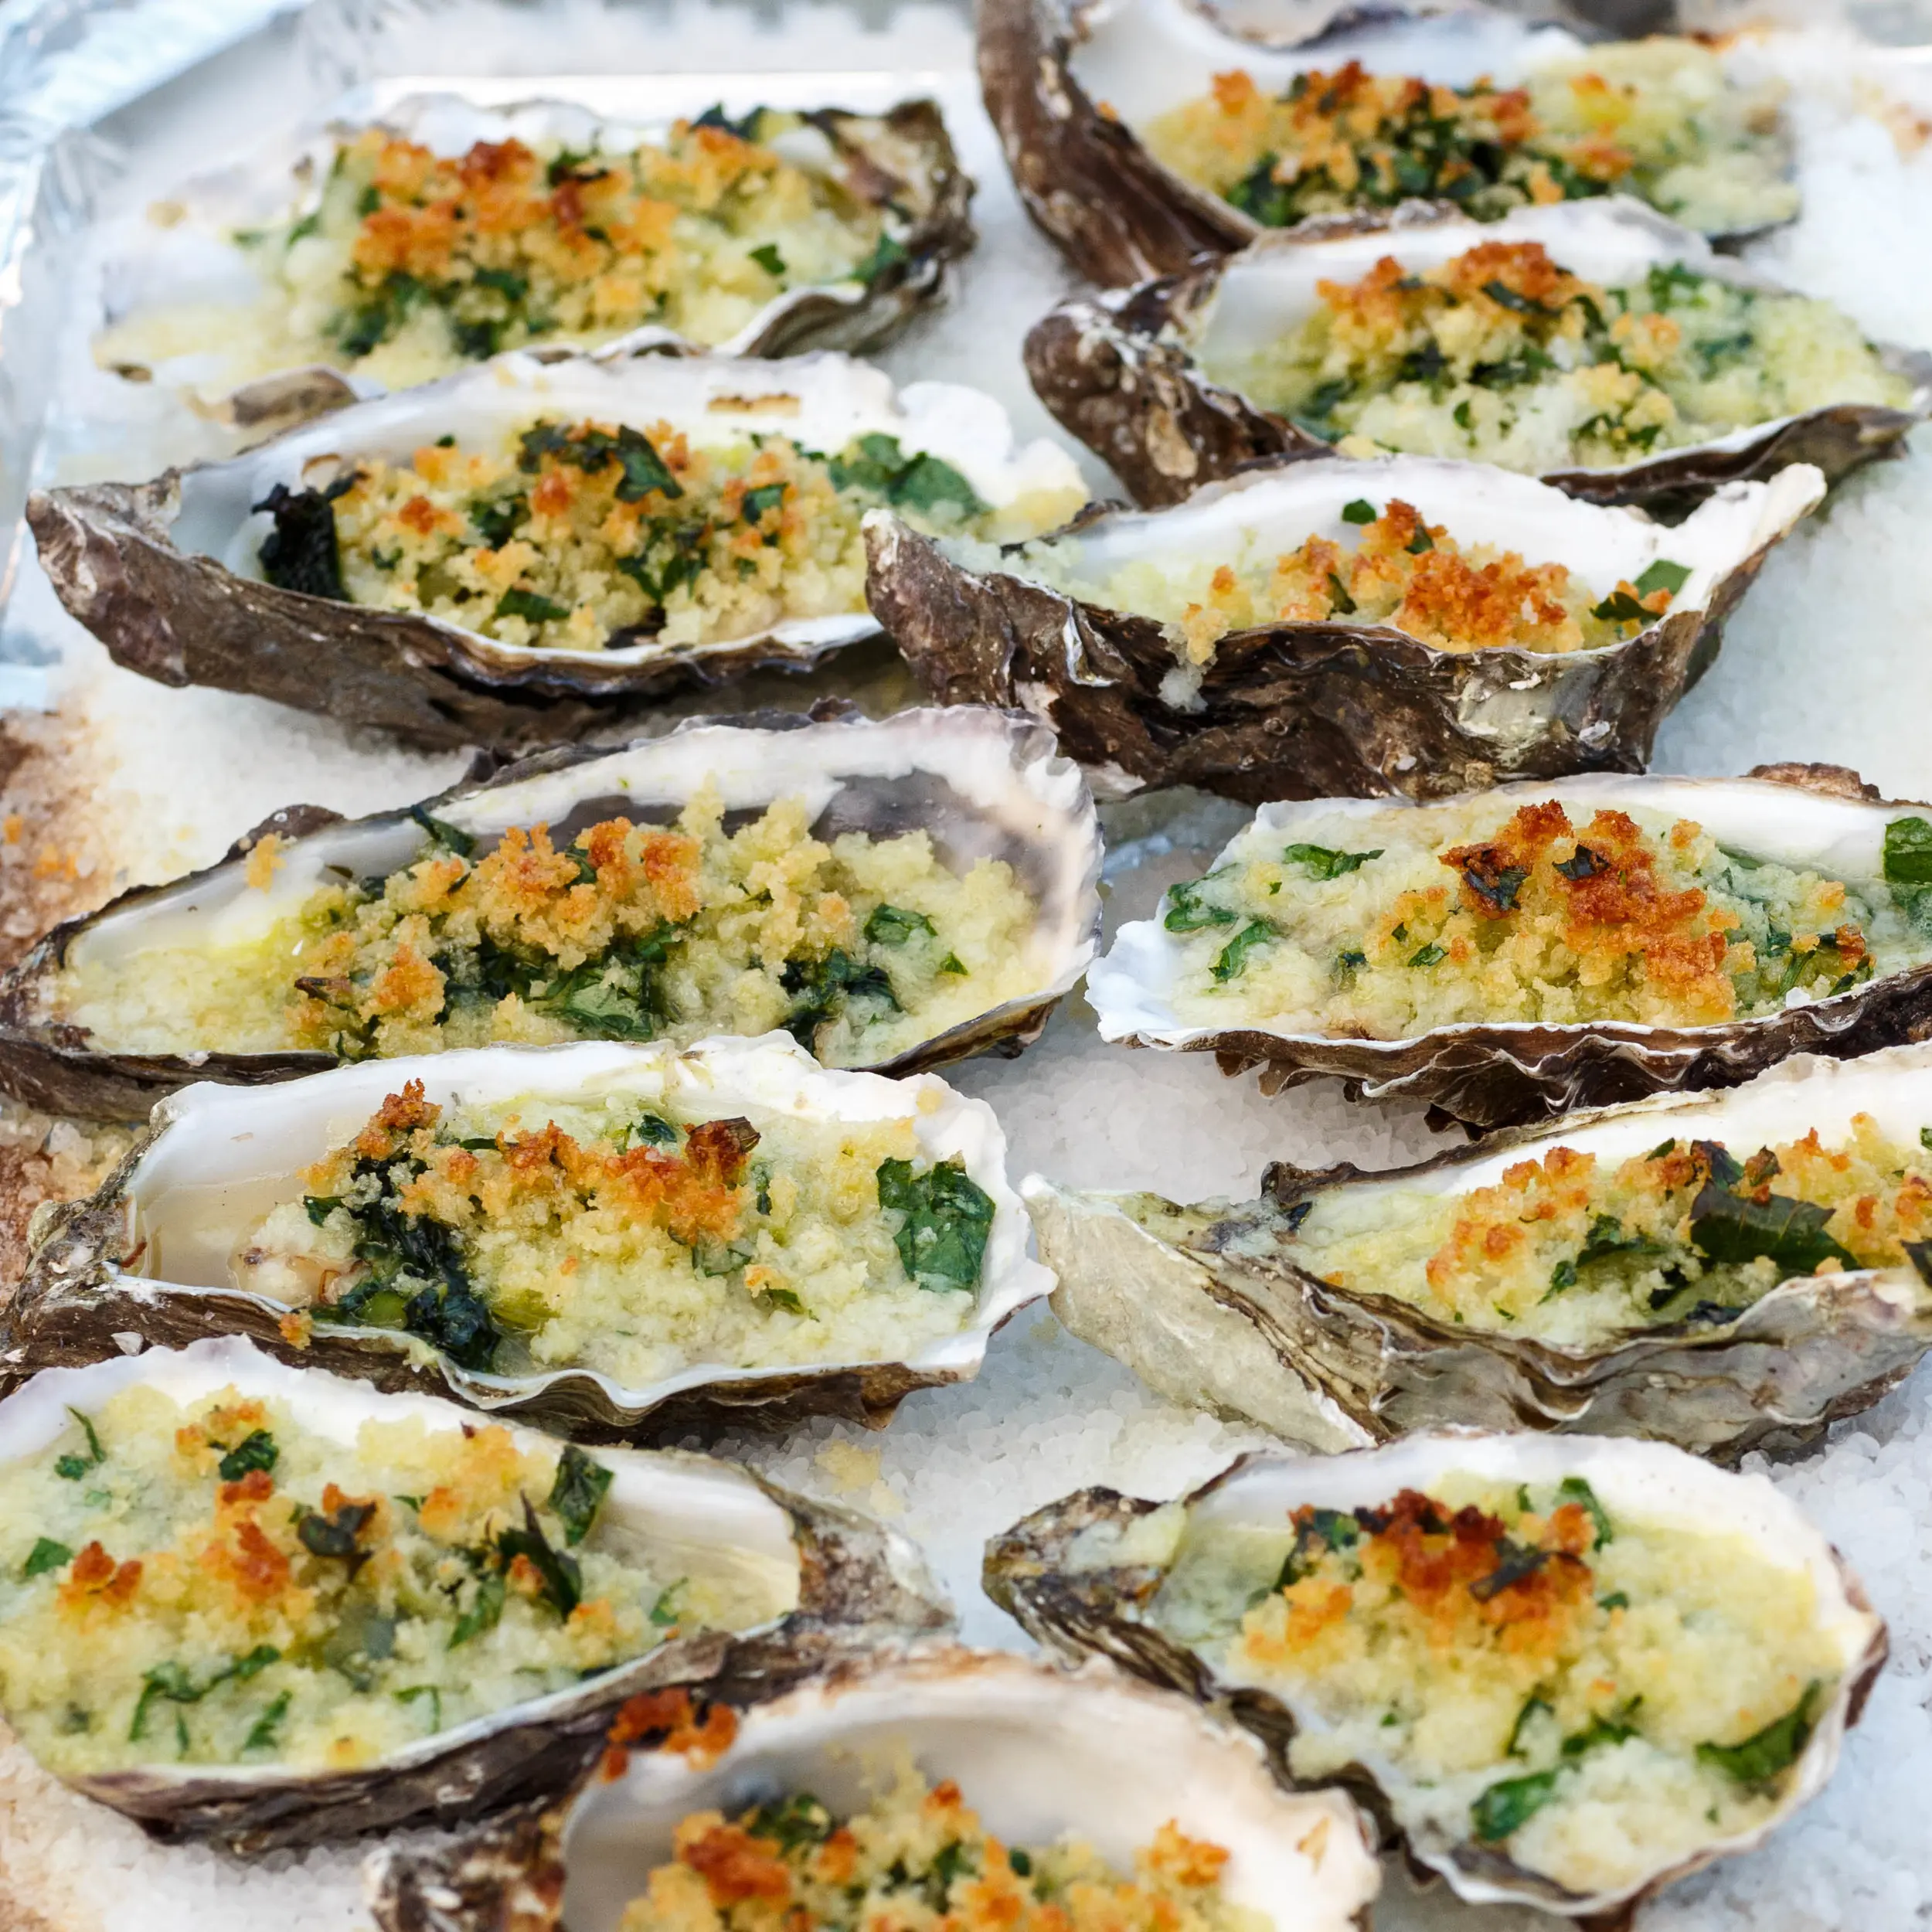 smoked oysters rockefeller - Do you eat oyster rockefeller with a fork